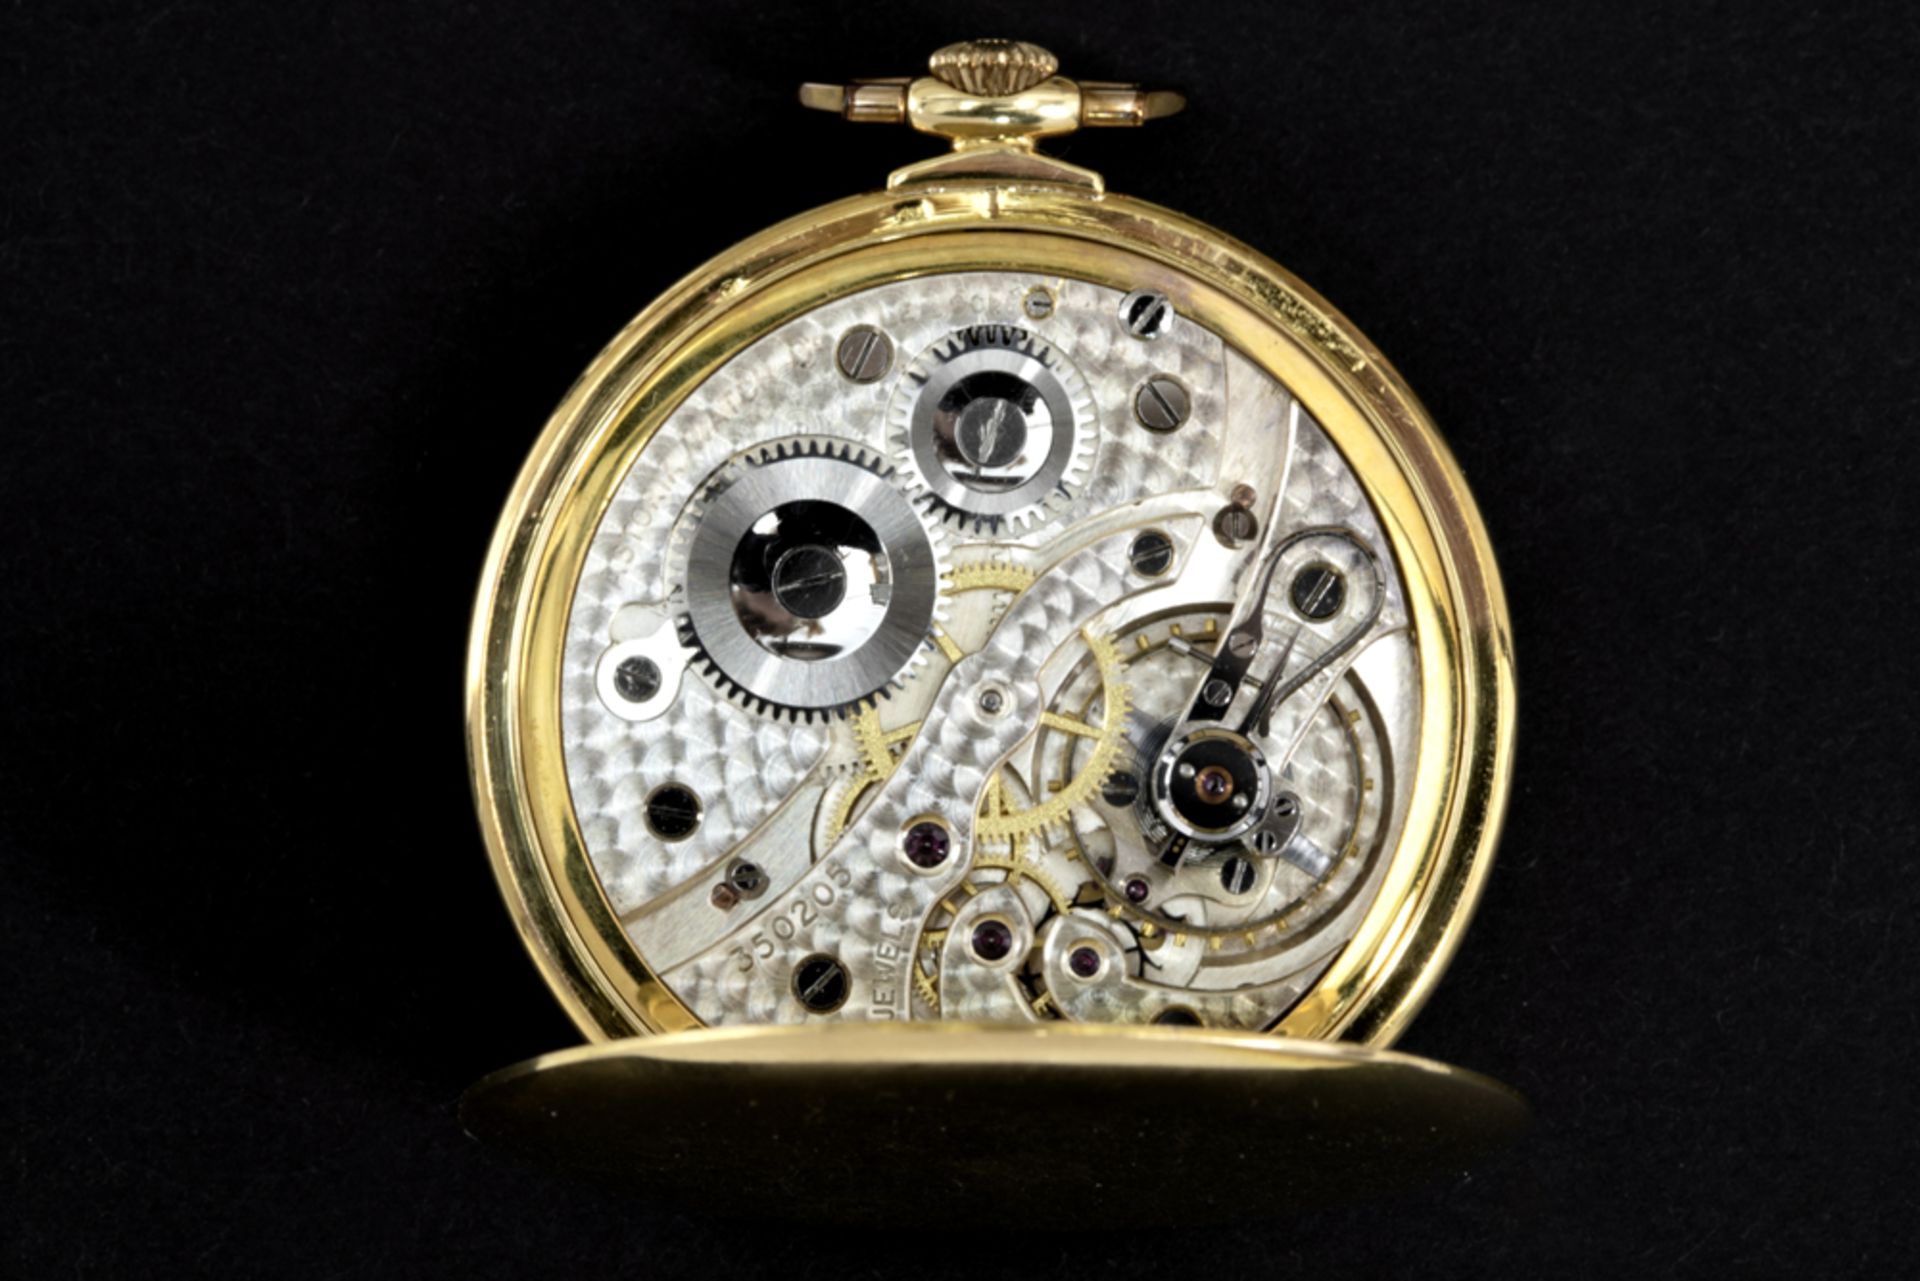 Chronomètre marked pocket watch with its case in yellow gold (18 carat) || CHRONOMETRE zakhorloge - Image 3 of 4